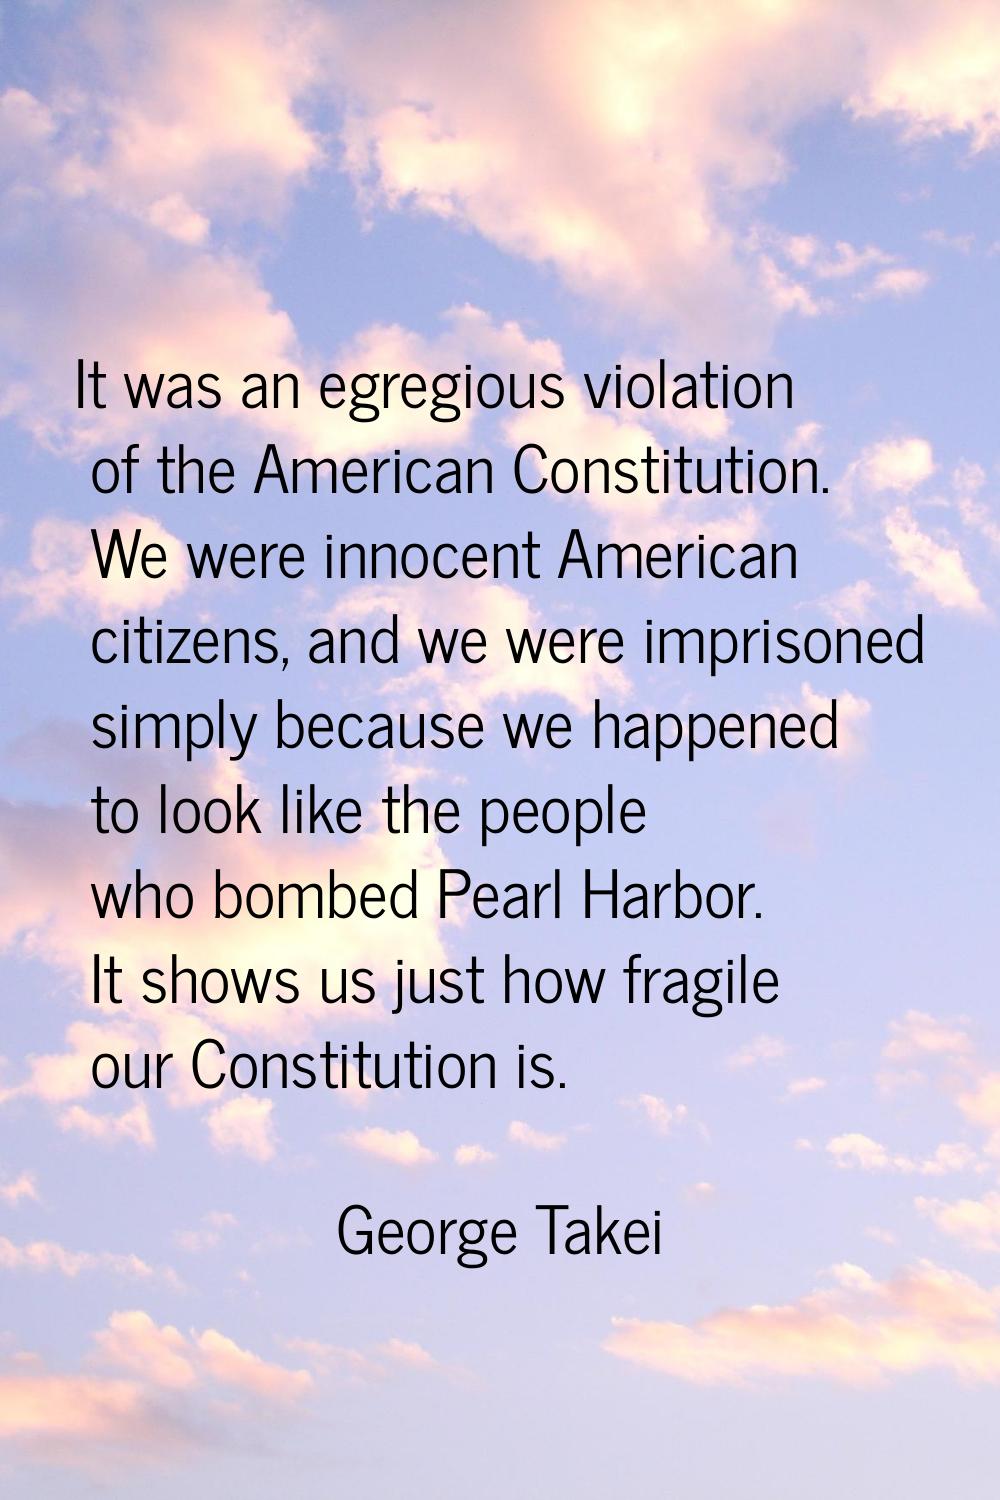 It was an egregious violation of the American Constitution. We were innocent American citizens, and